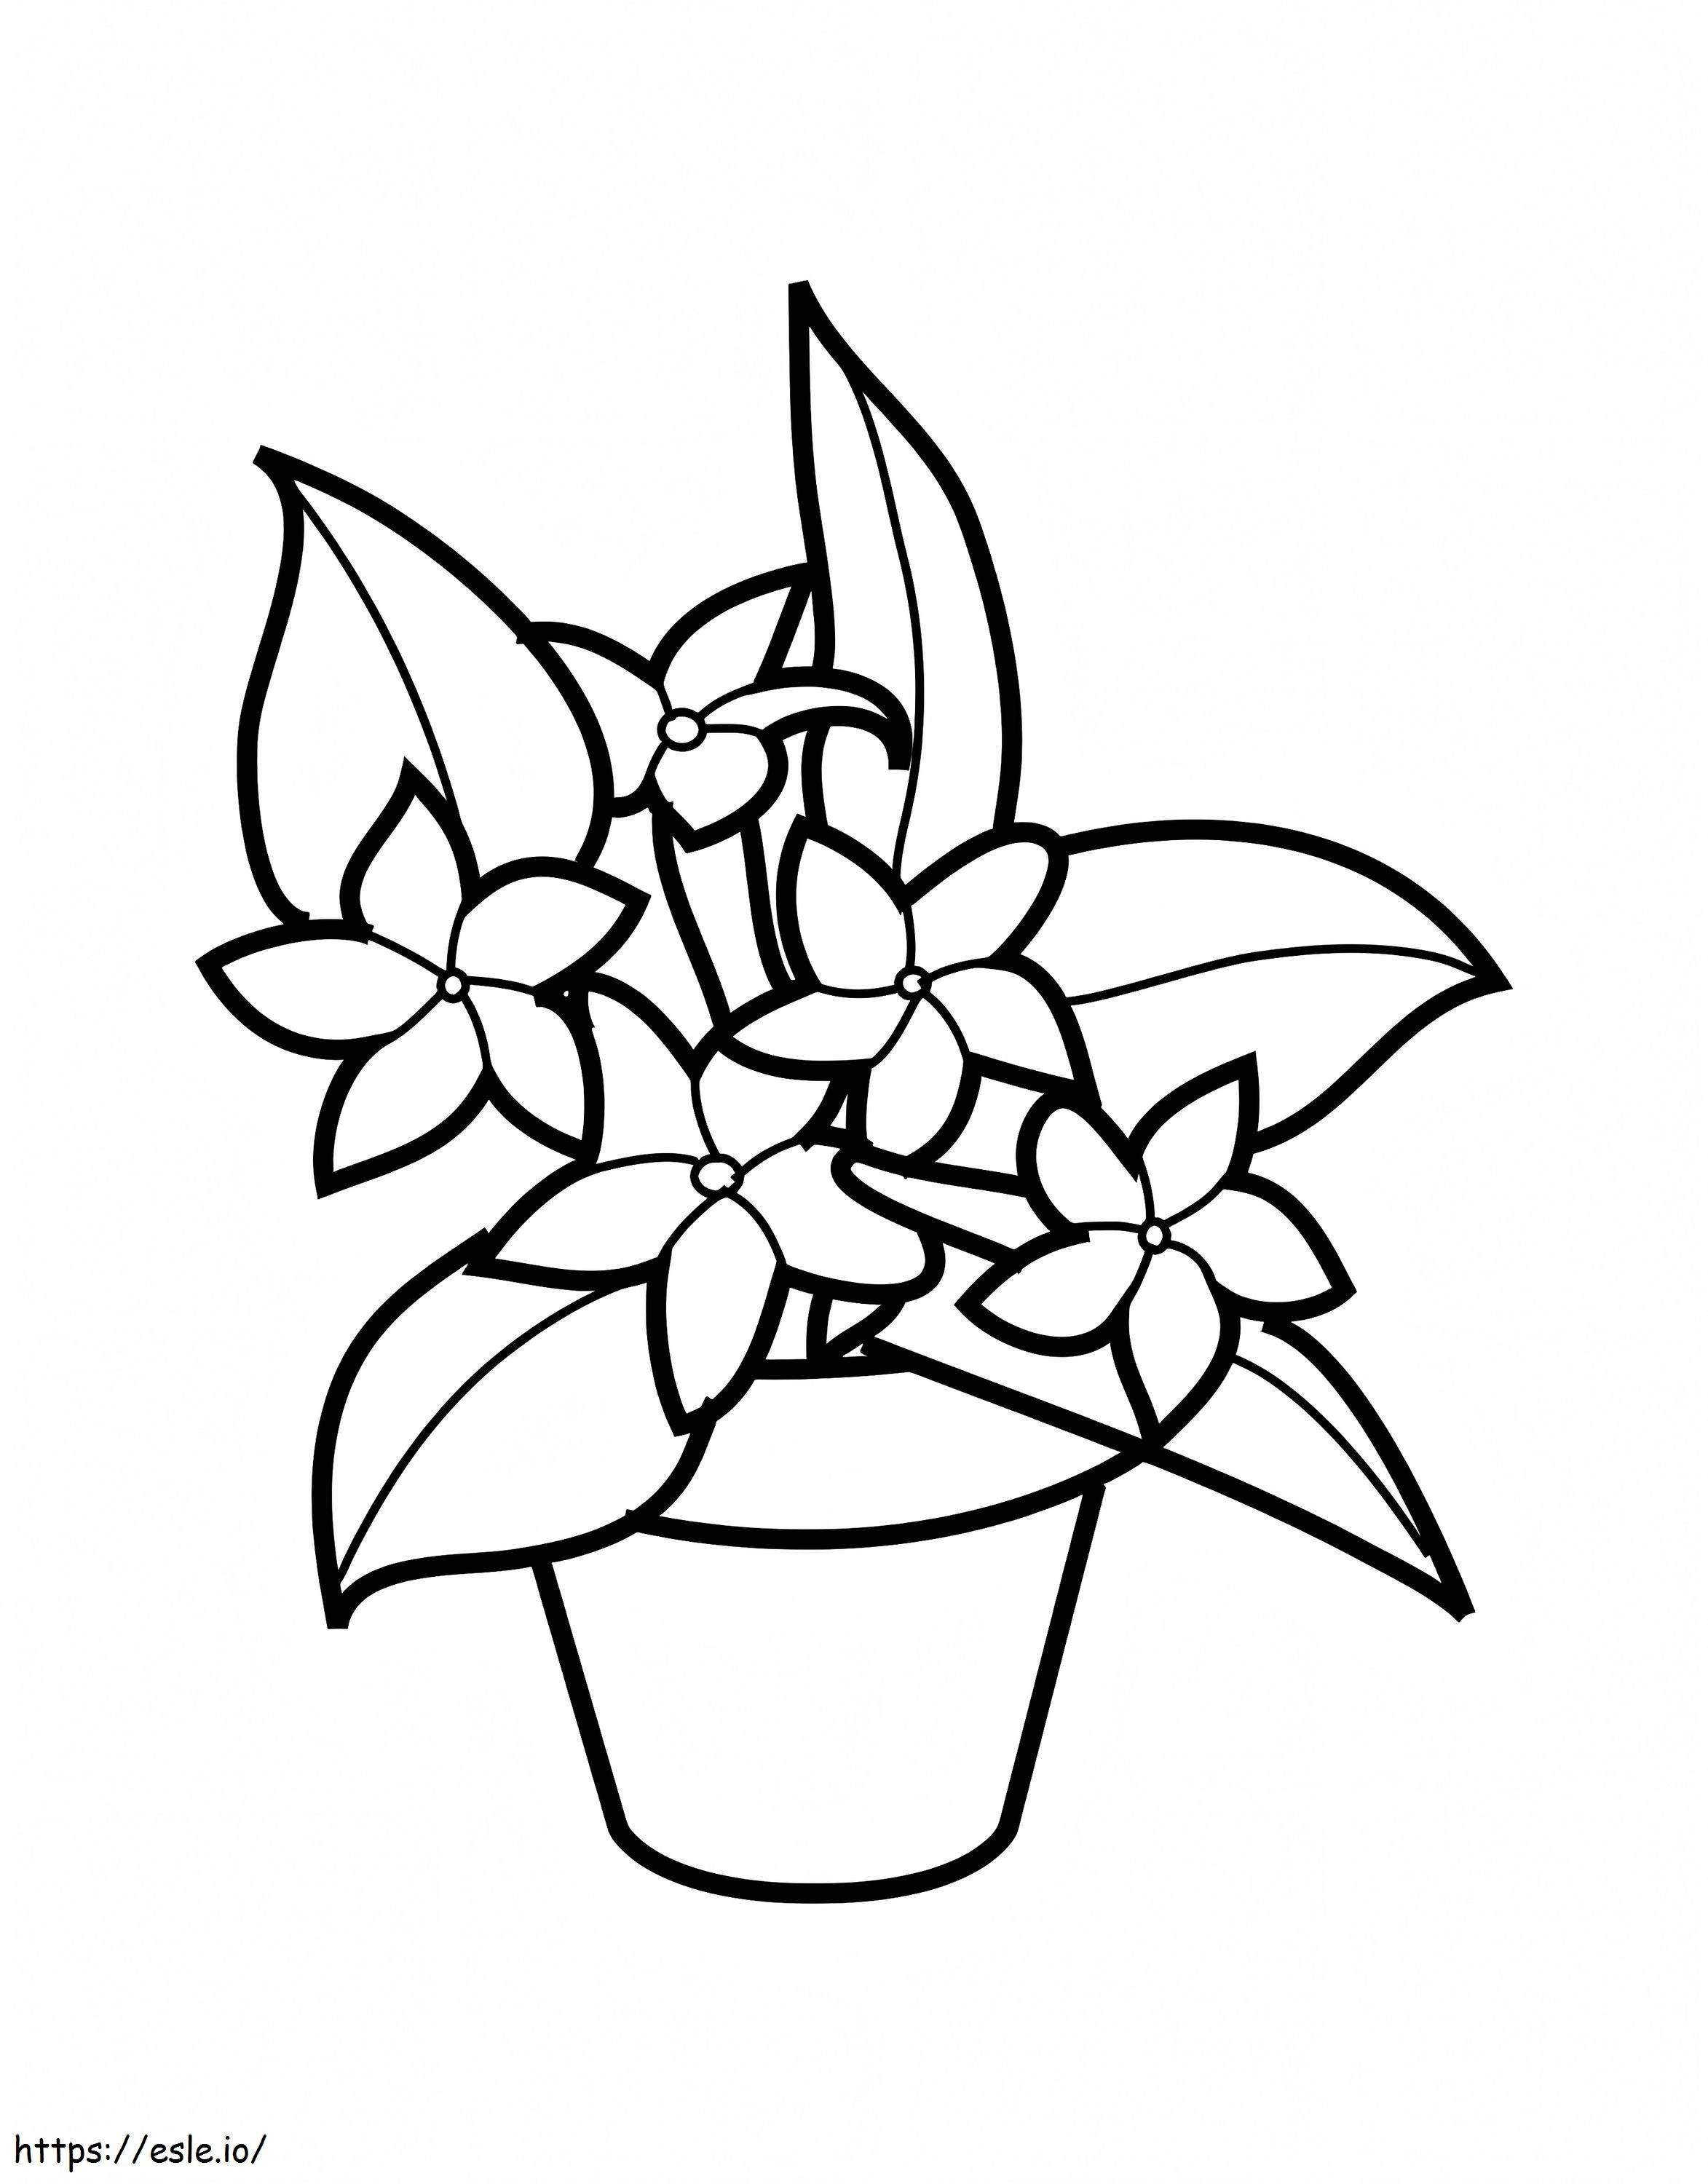 Flowers In A Pot coloring page